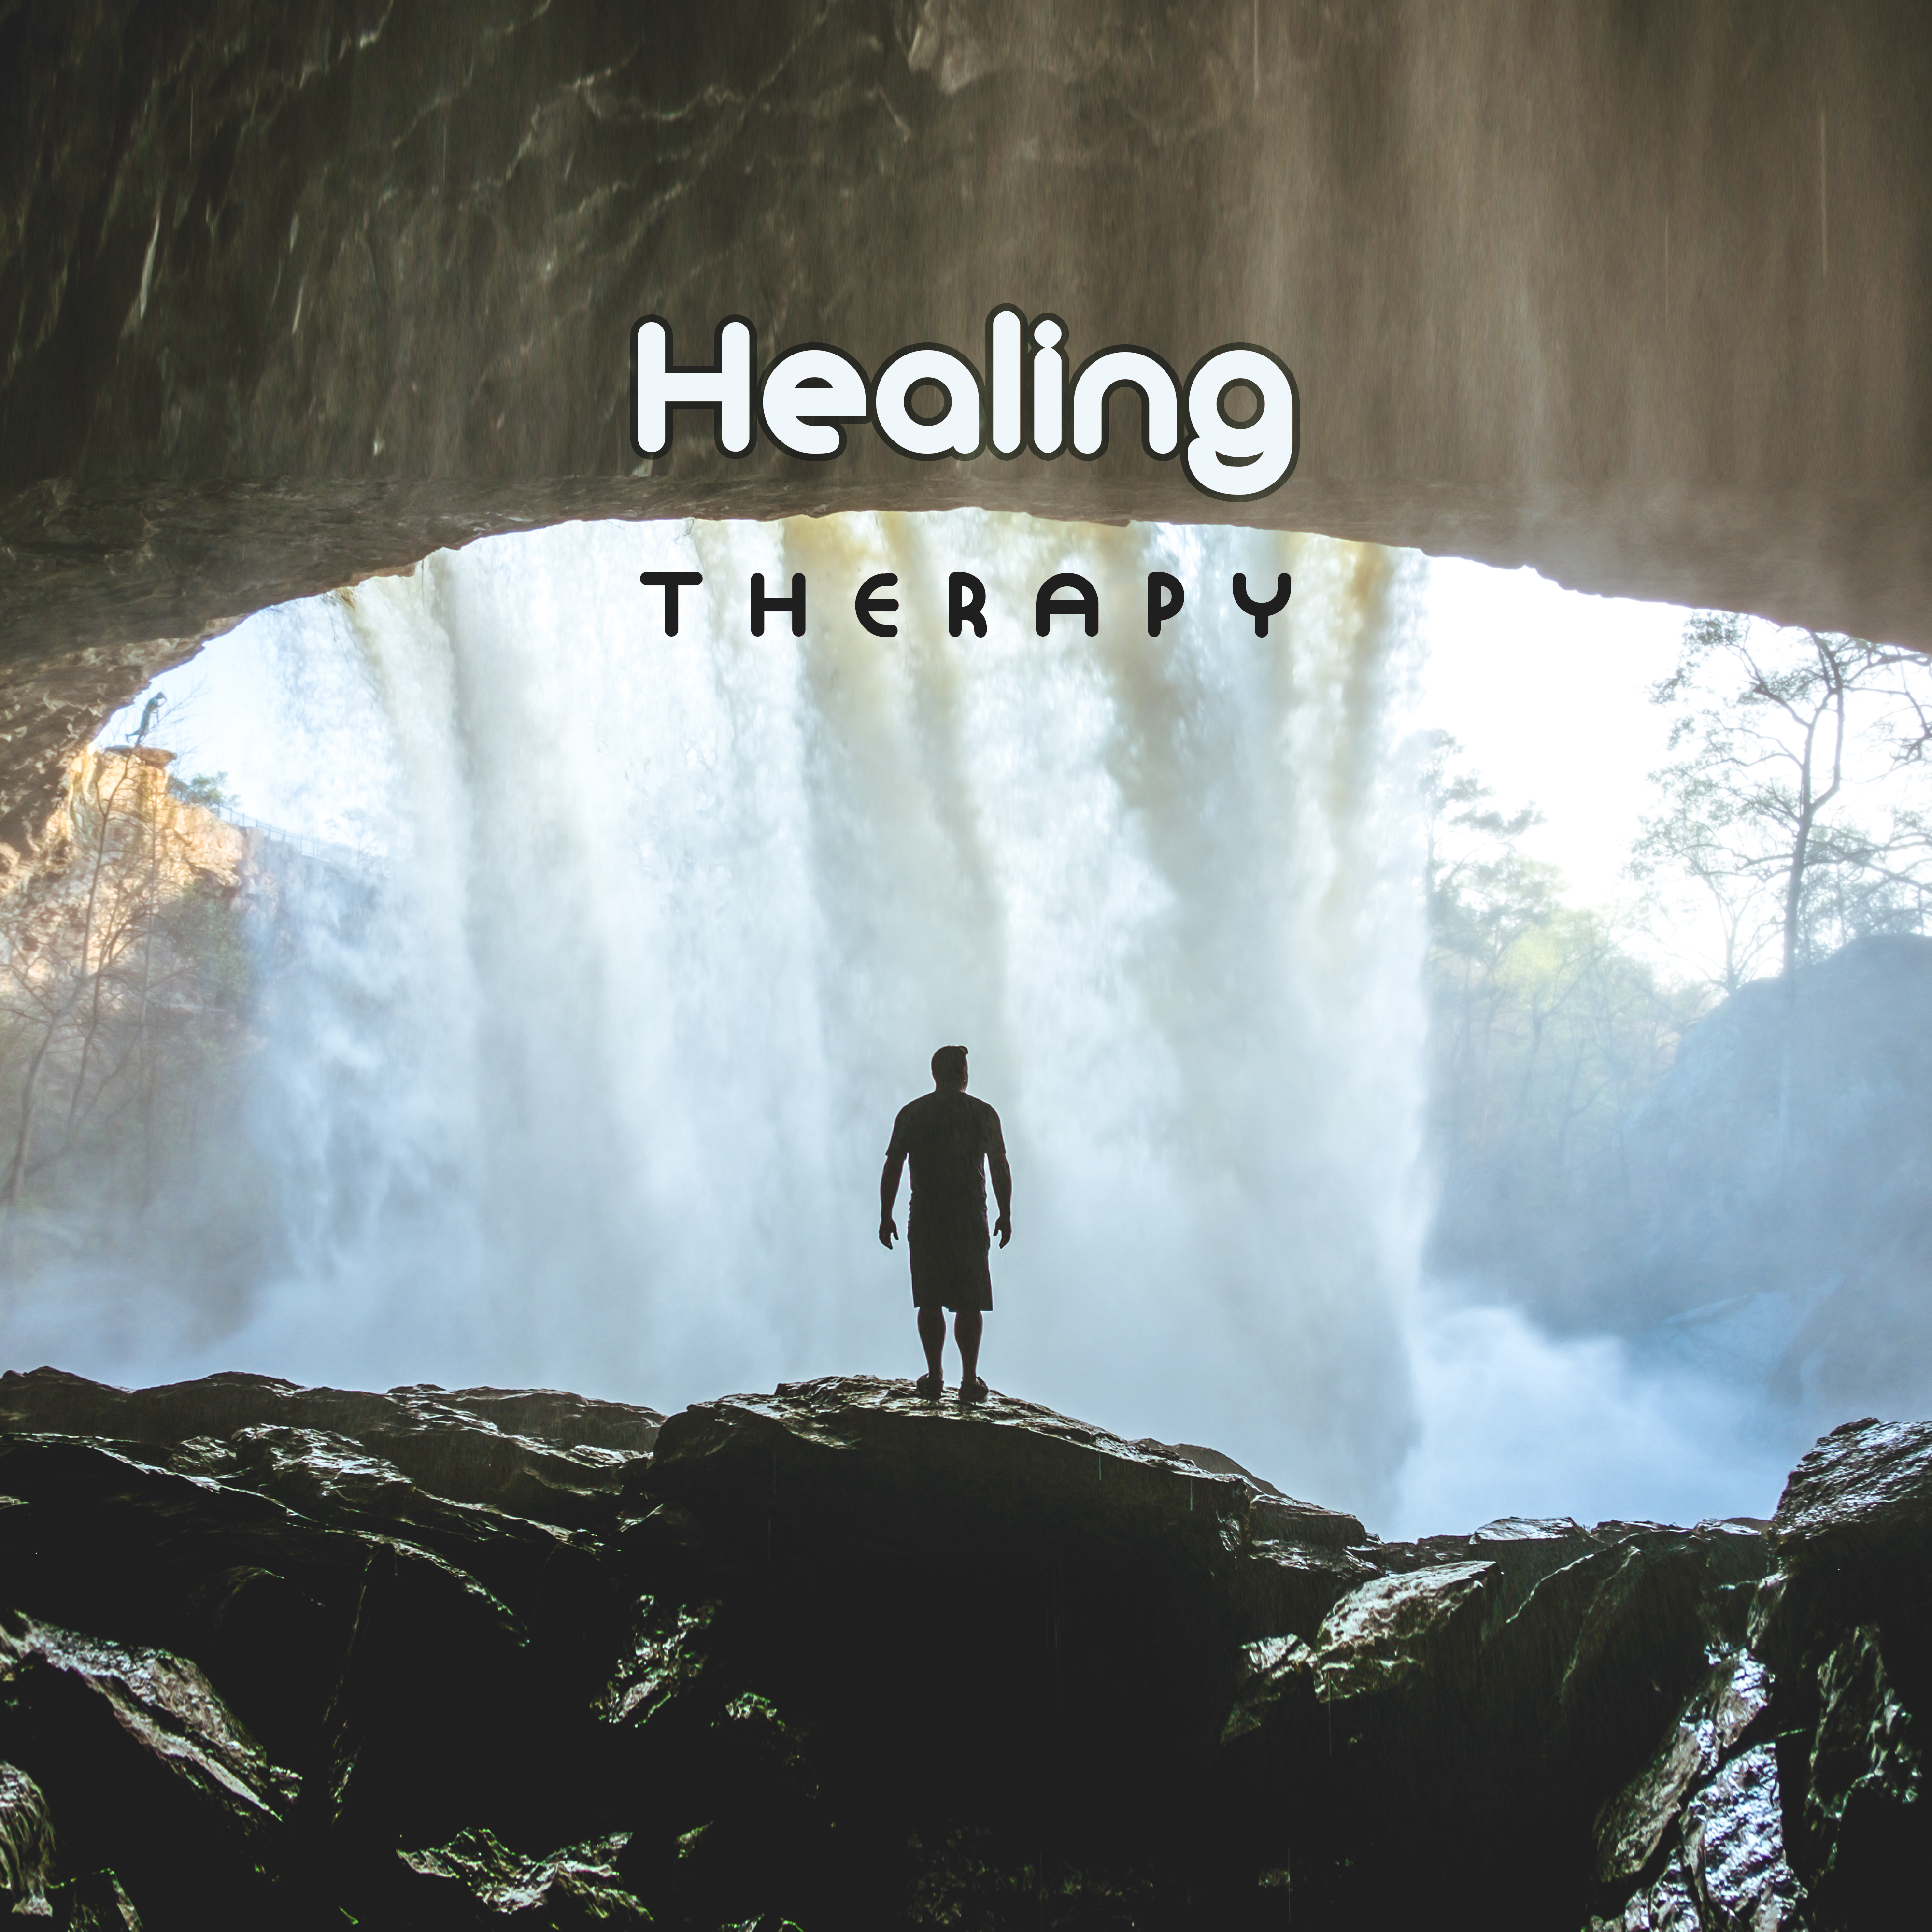 Healing Therapy – Peaceful Music to Rest, Pure Relaxation, Stress Relief, Sounds of Water, Deep Sleep, Calm Mind, Nature Sounds